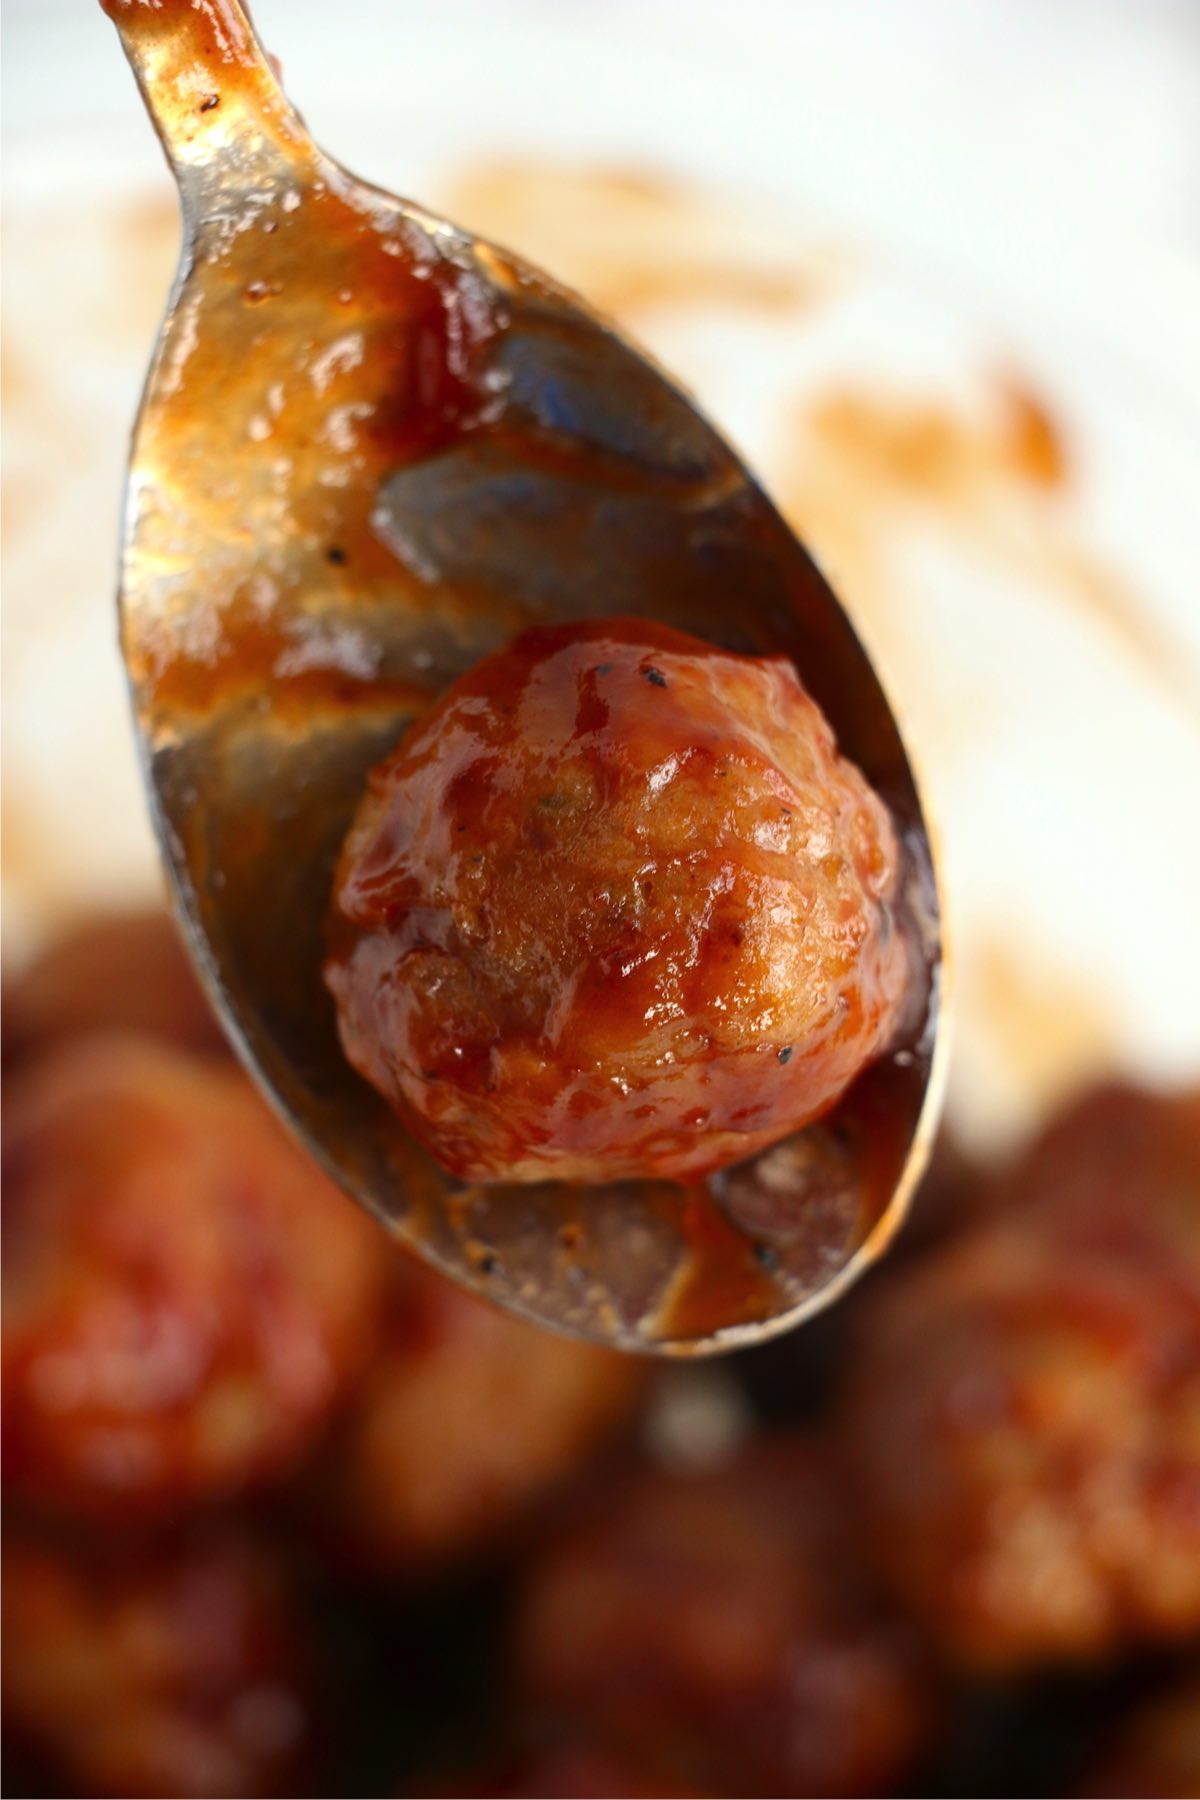 Closeup shot of meatball covered in barbecue sauce on spoon